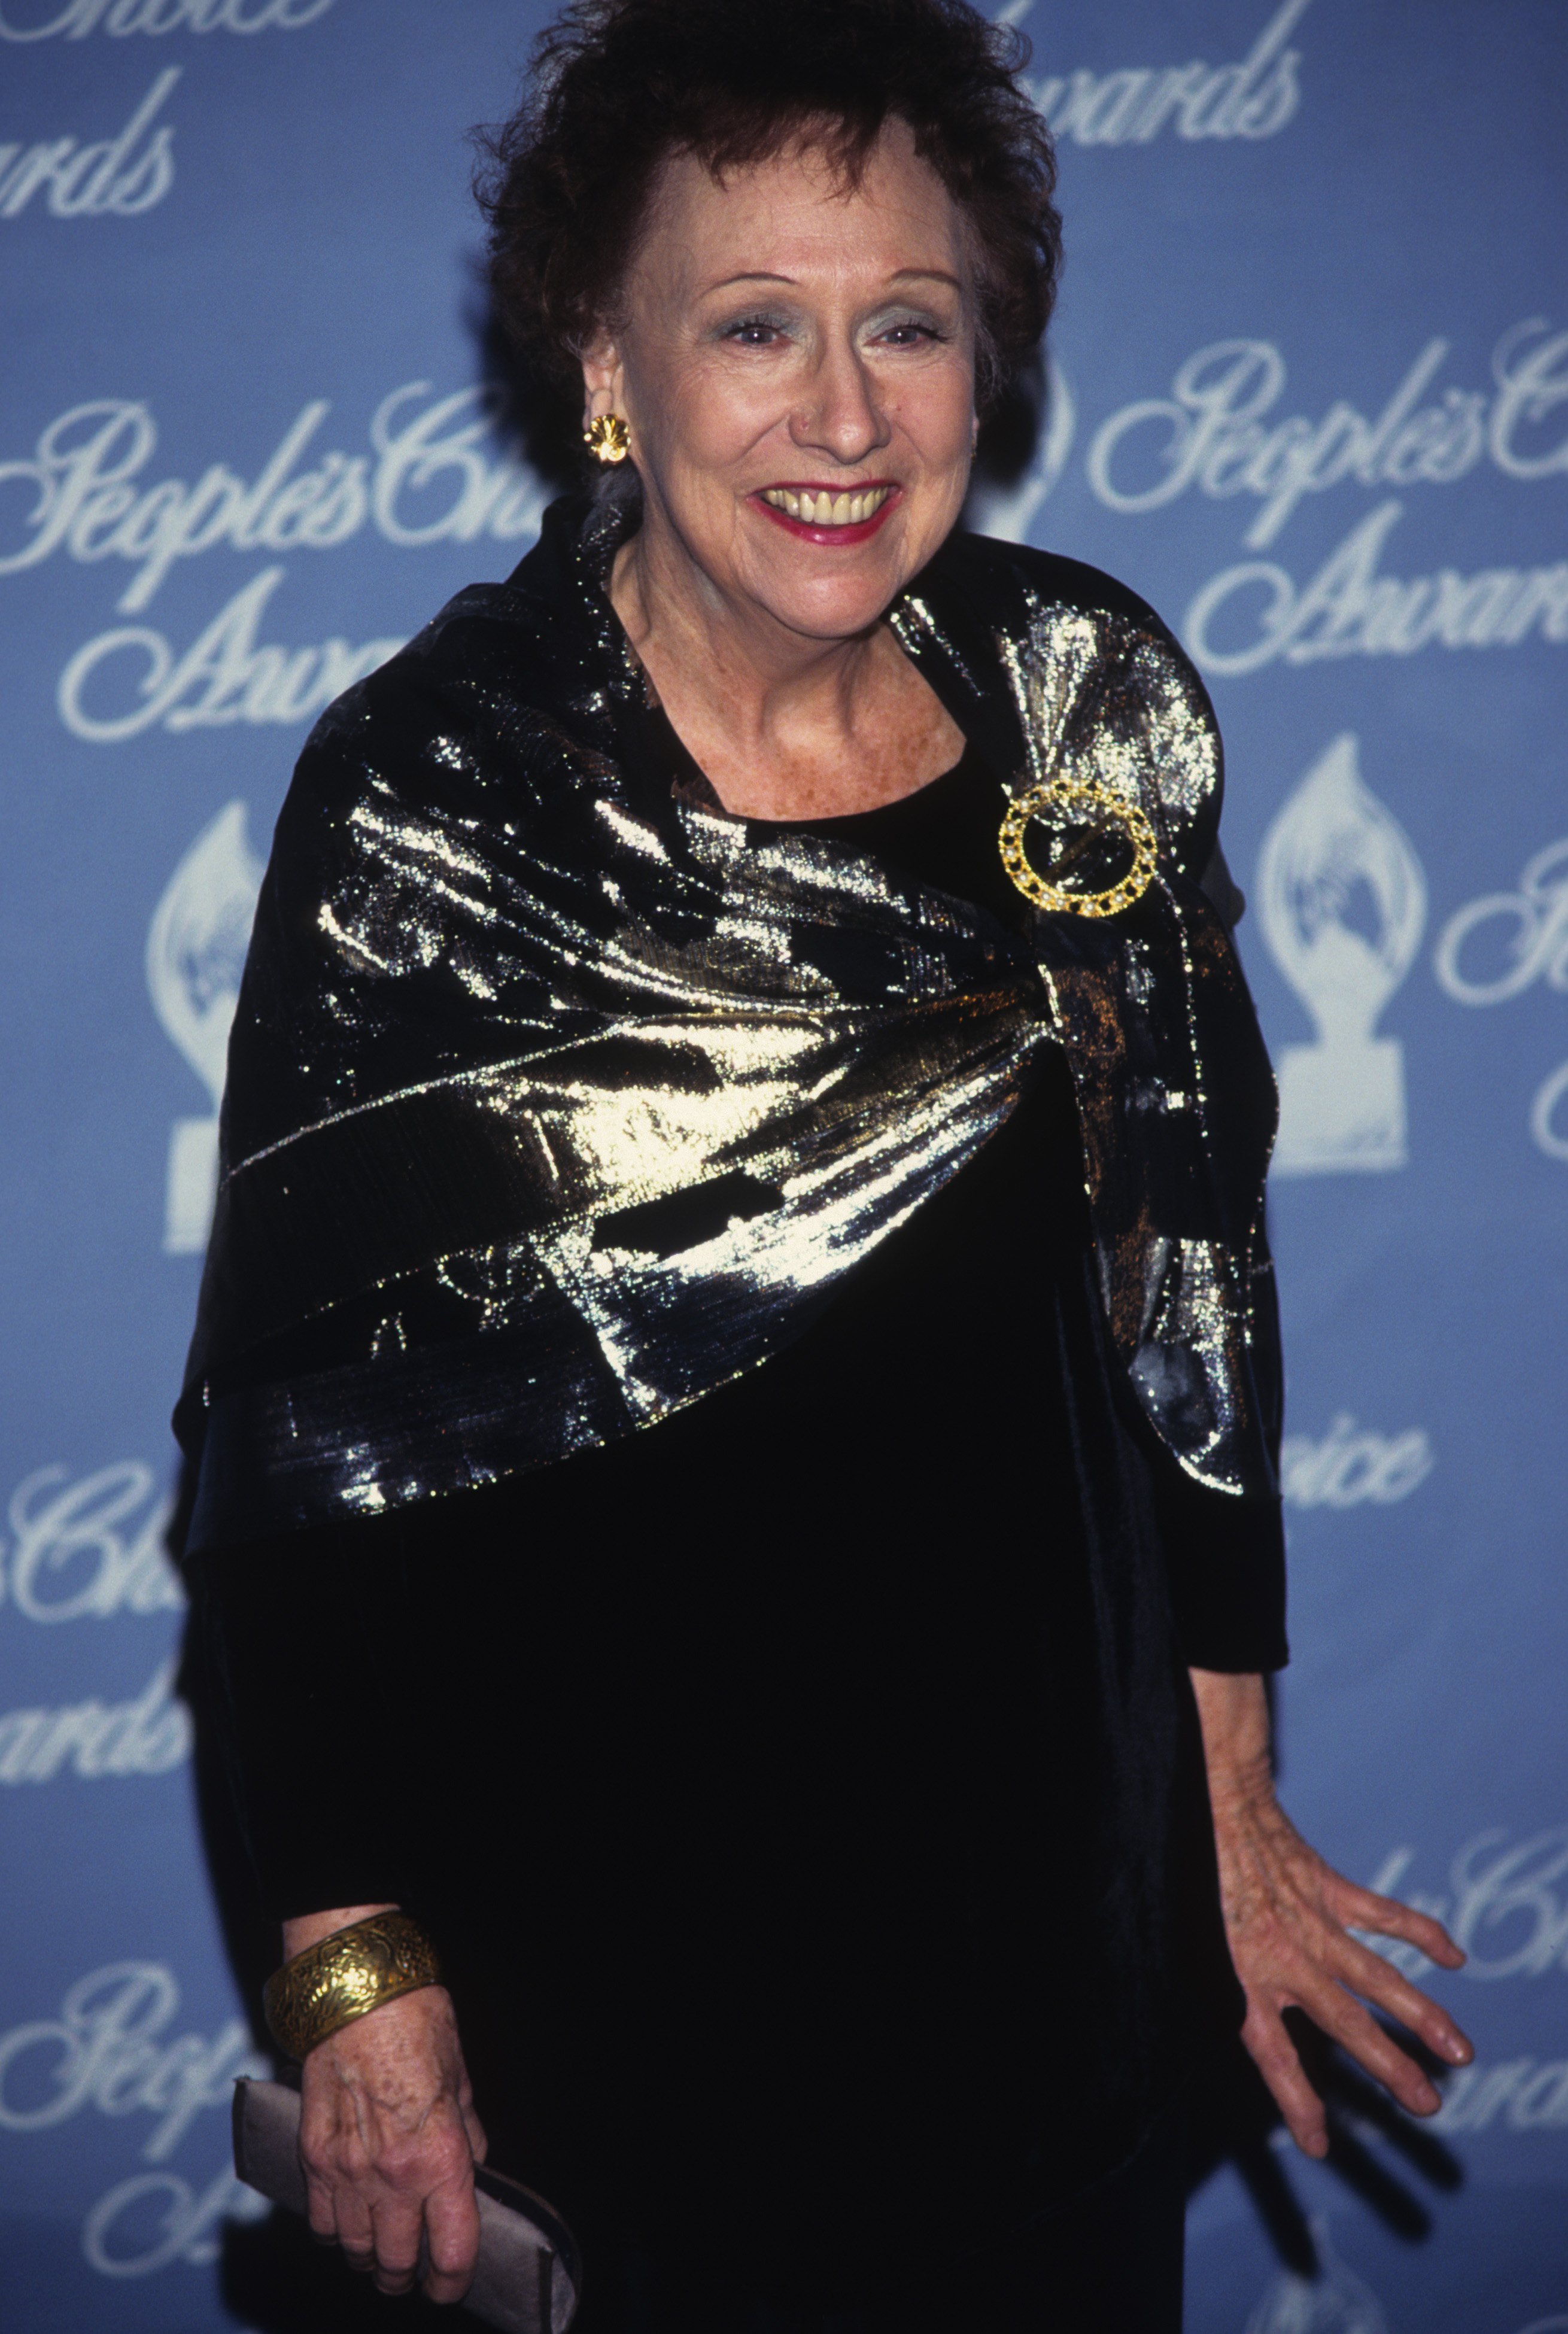  Jean Stapleton posing on the red carpet at the People's Choice Awards in 1997